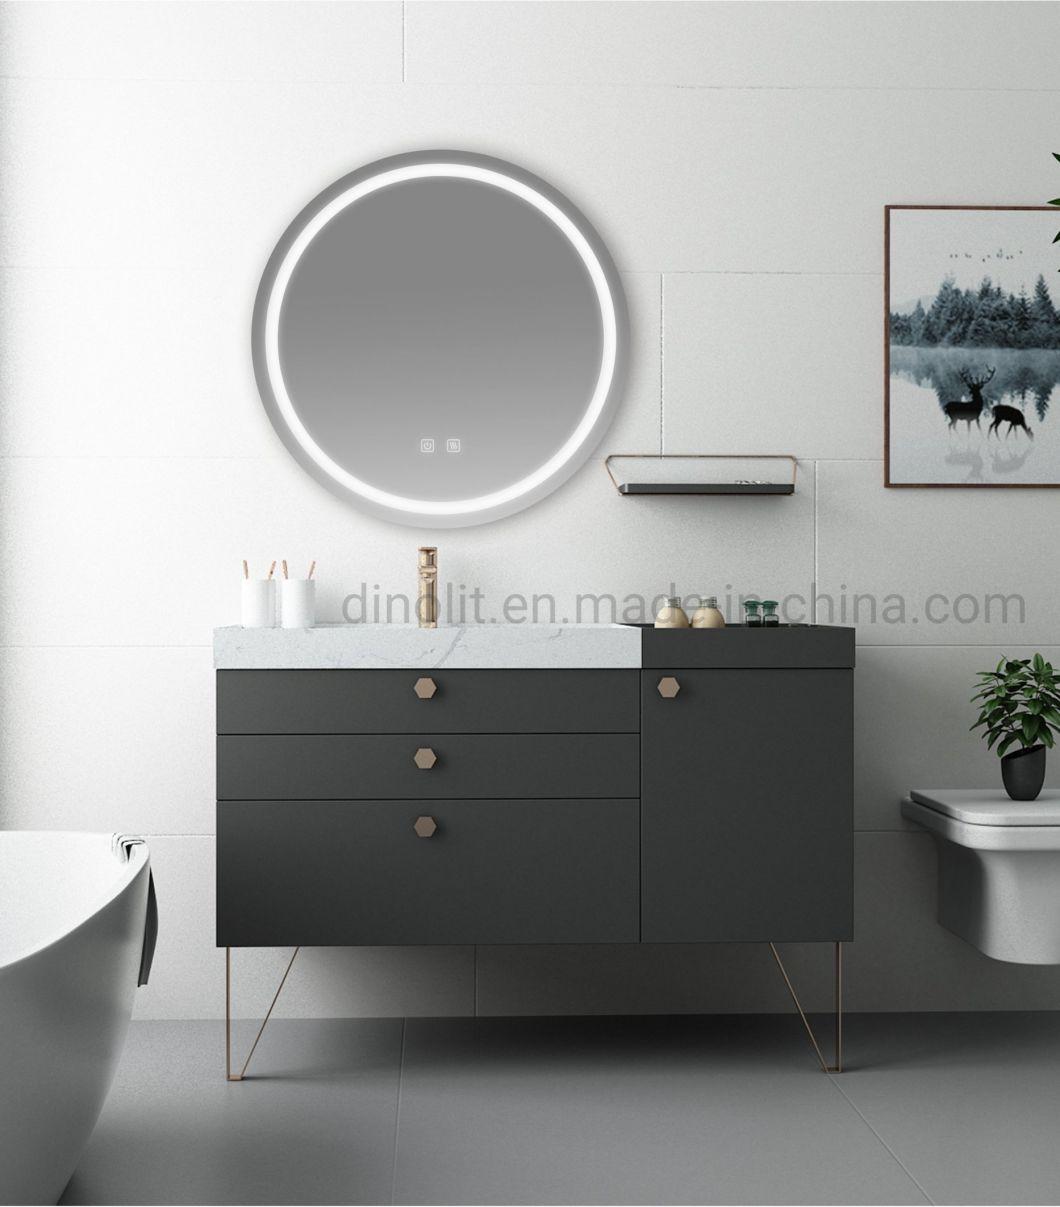 Bathroom Waterproof 220V/110V Touch Switch Included LED Bath Vanity Wall Mirror with Circle Lighting /Demister/Digital Clock/Dimming/Color Changing CE ETL